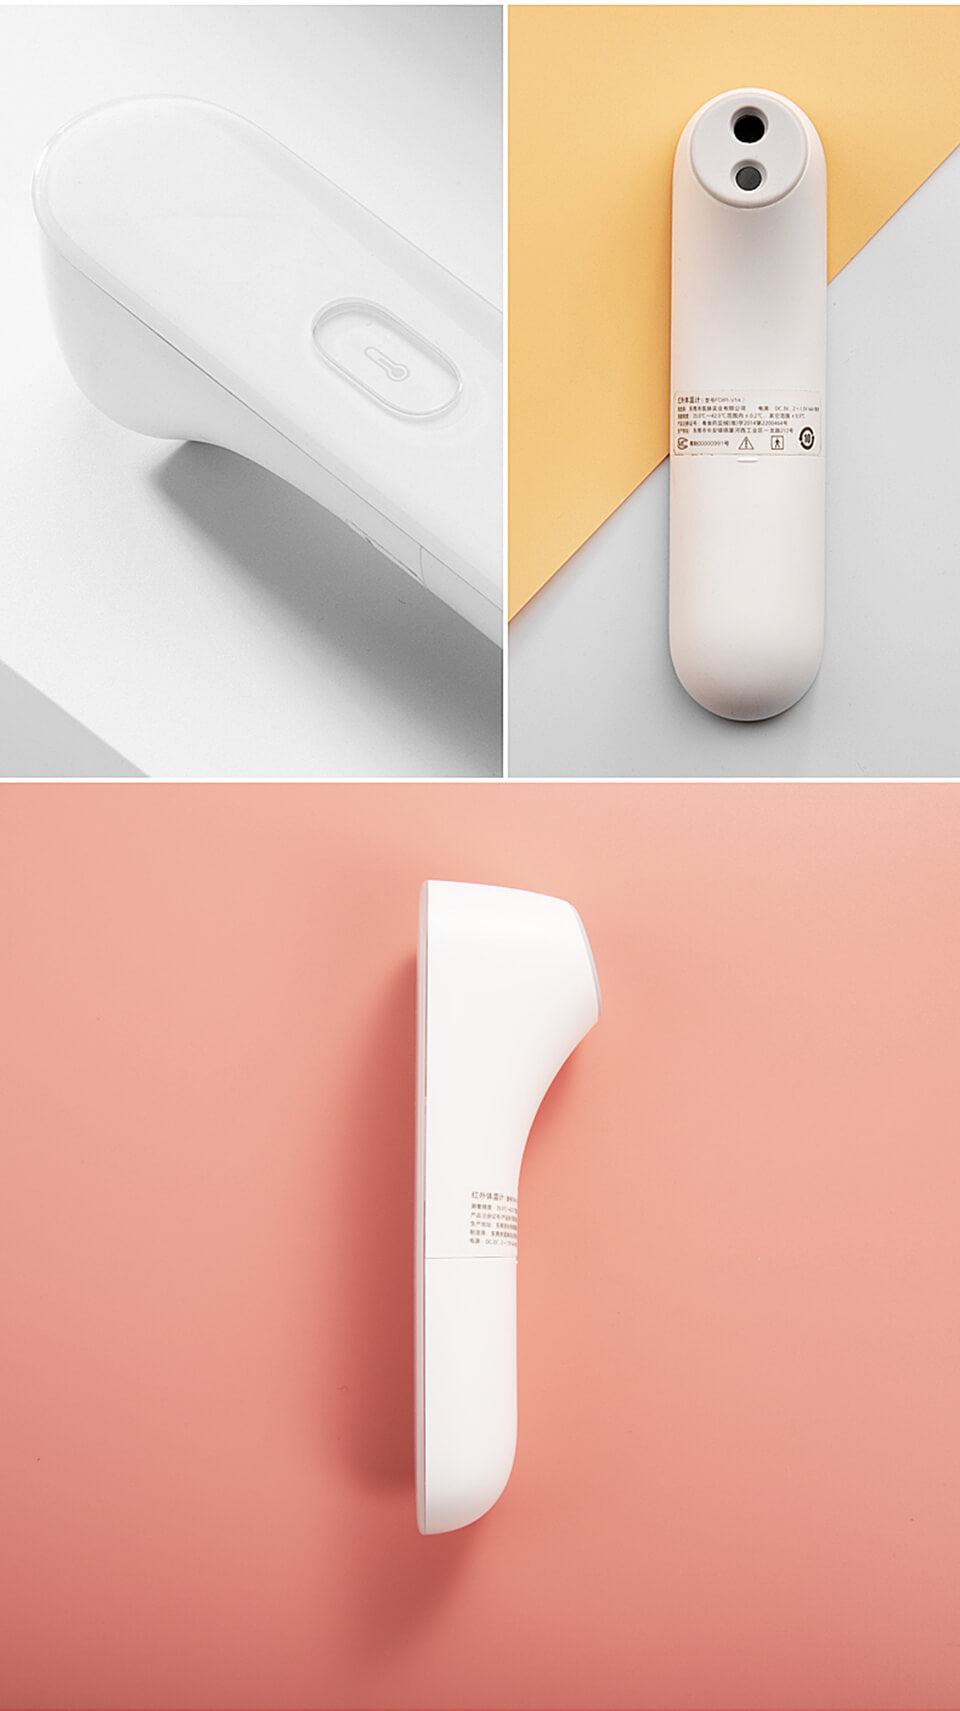 Xiaomi Thermometer Product Show